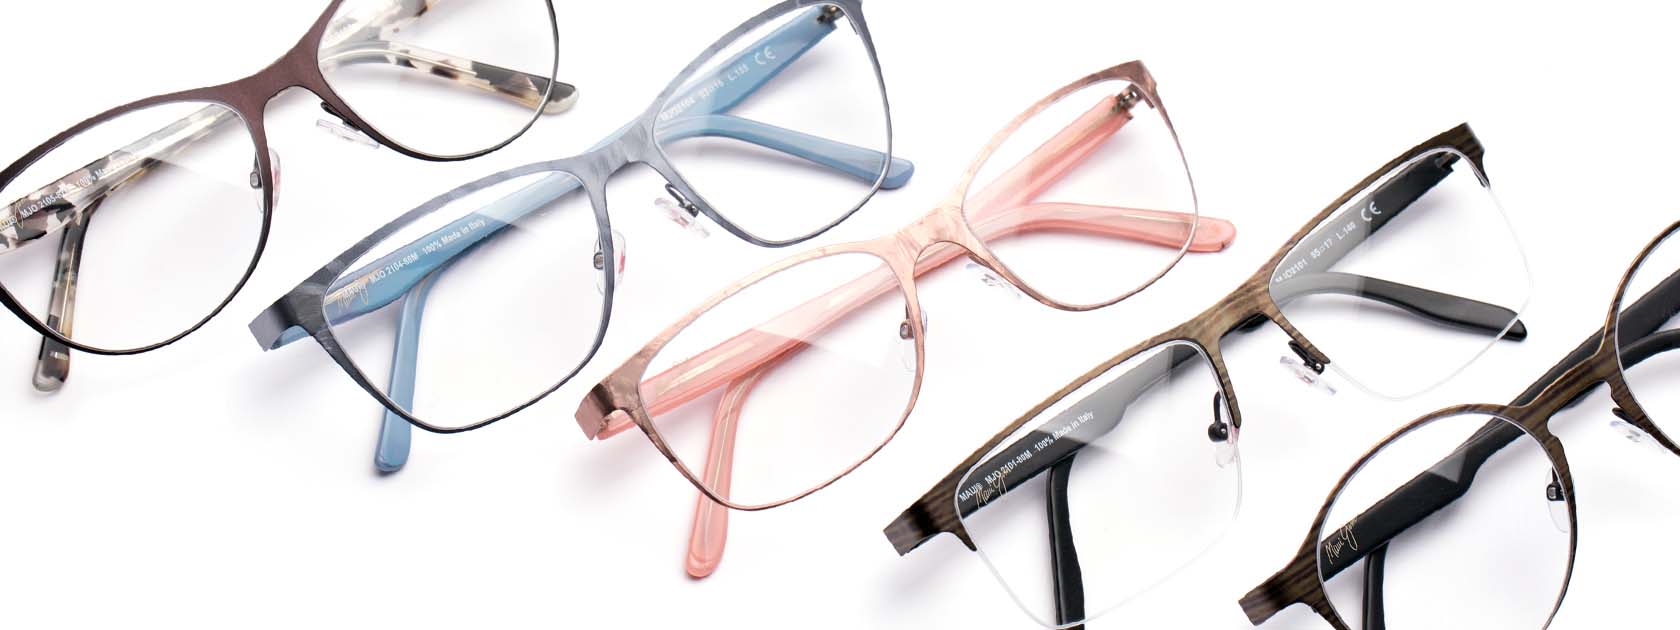 five pairs of ophthalmic glasses displayed over white background